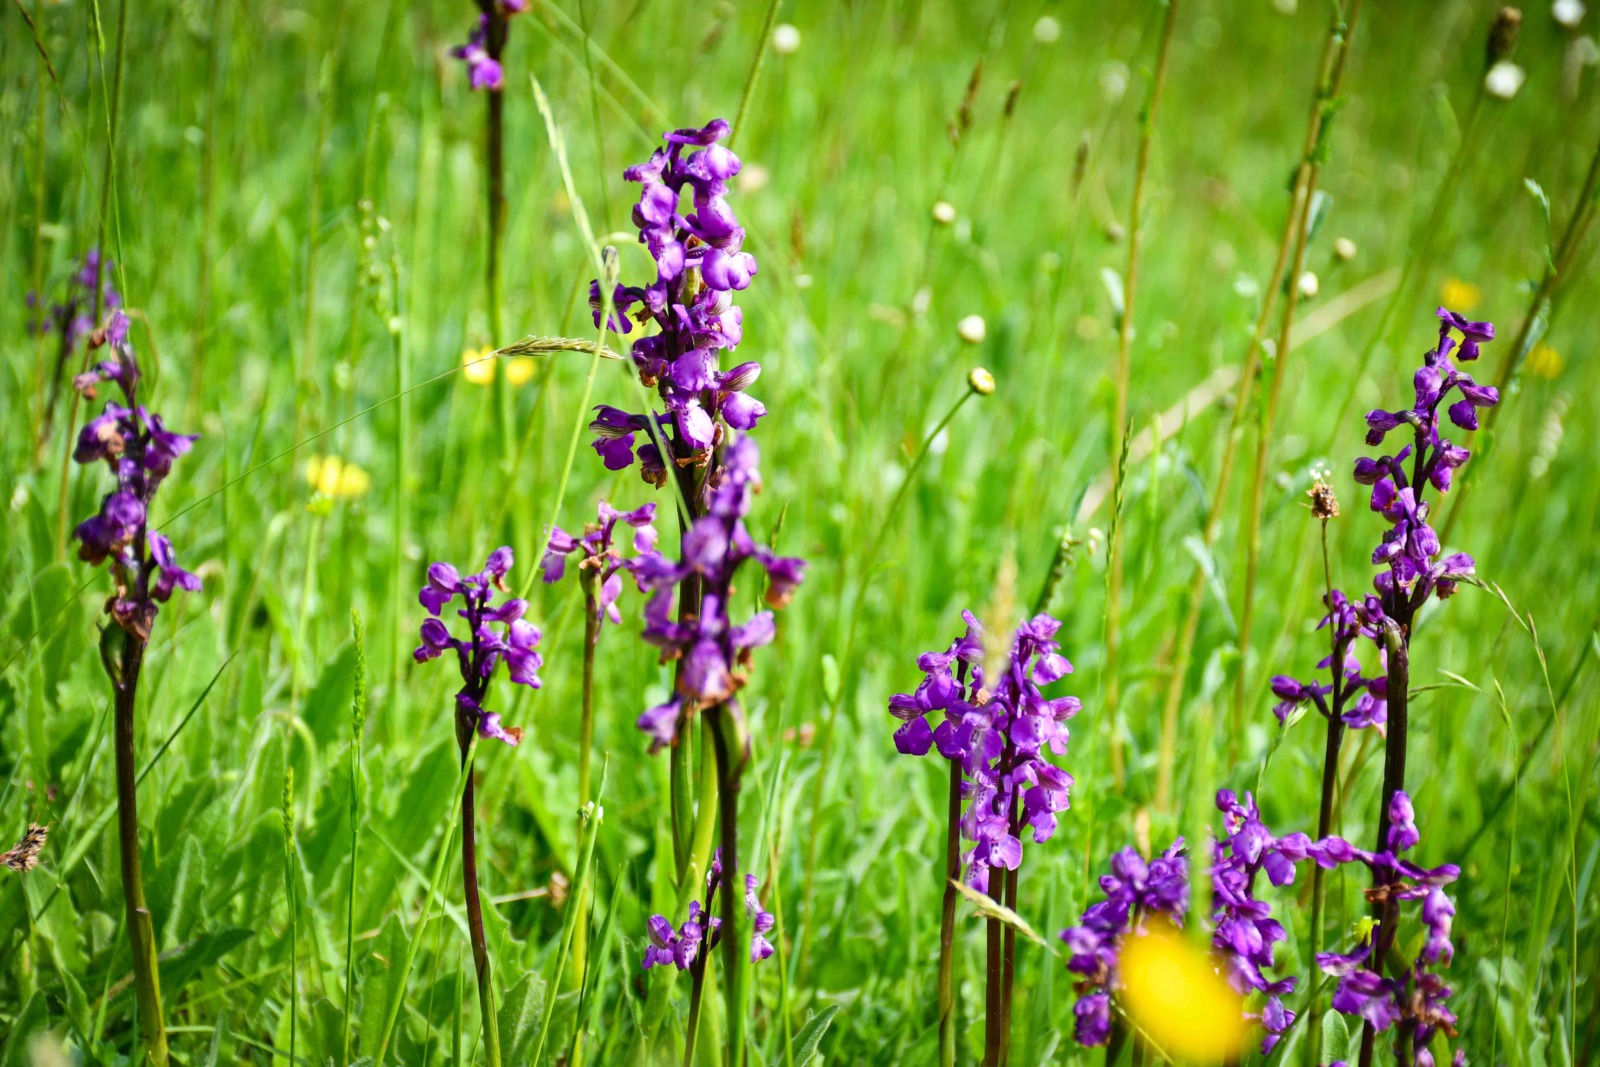 The orchids in front of Scotney House © French Moments